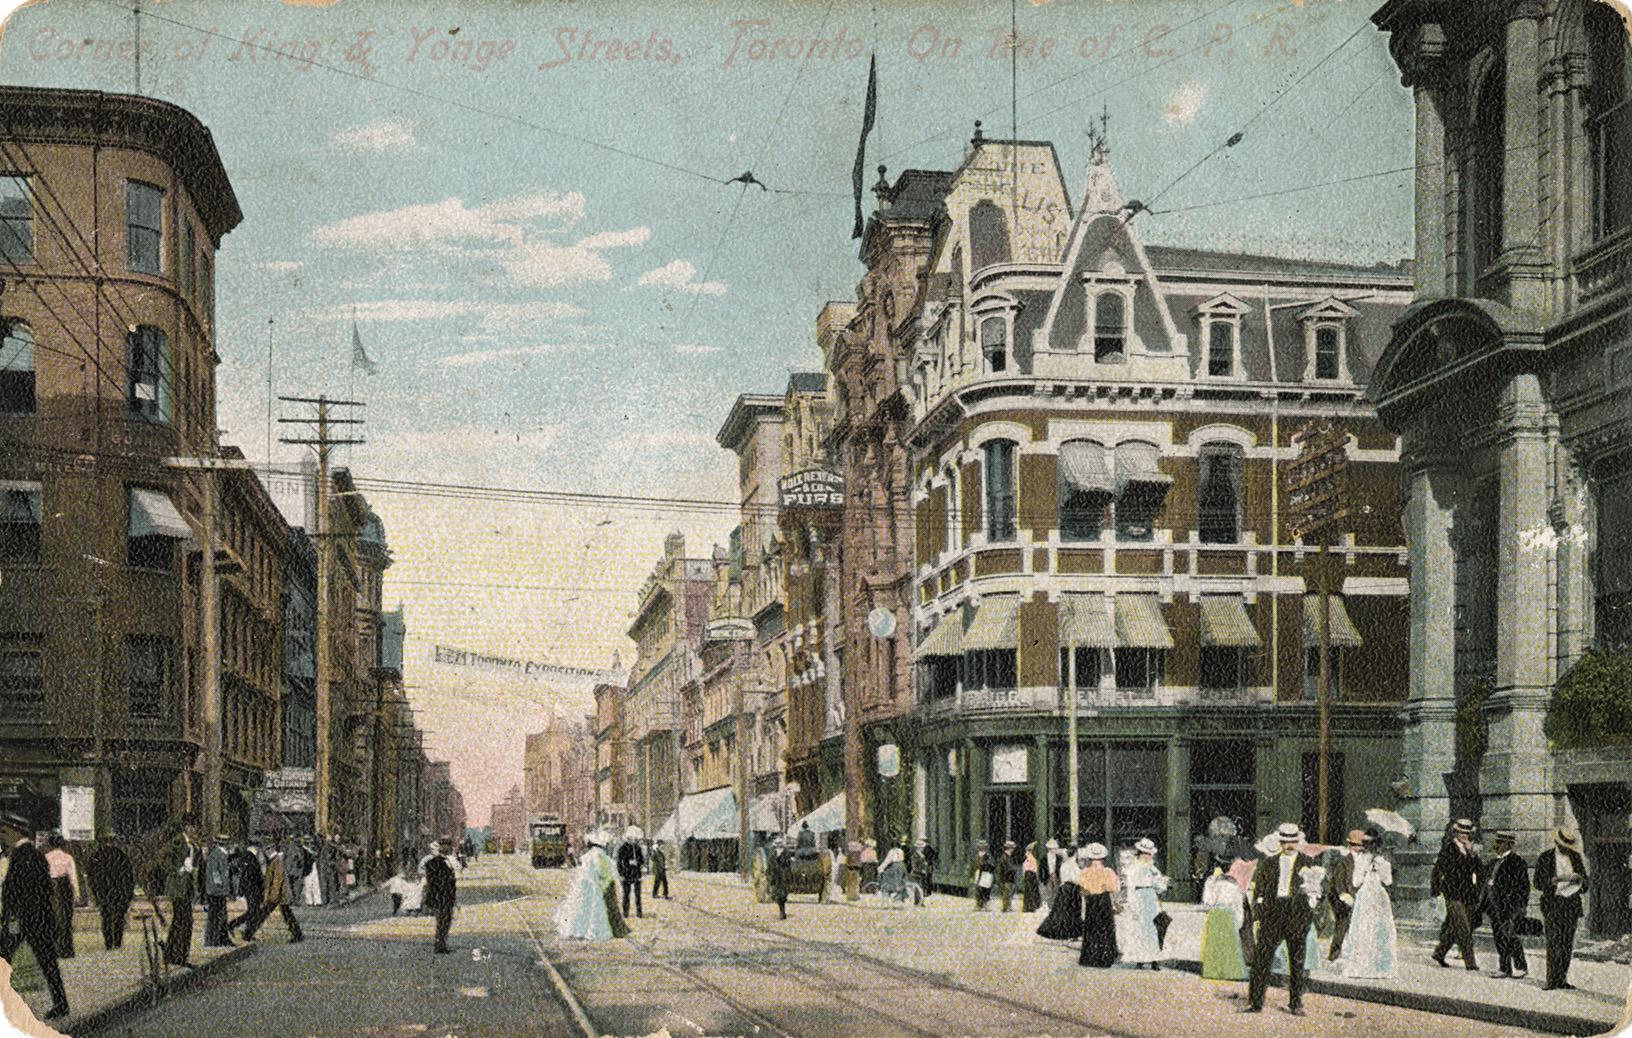 Colorized photograph of a busy downtown street wit many pedestrians.
